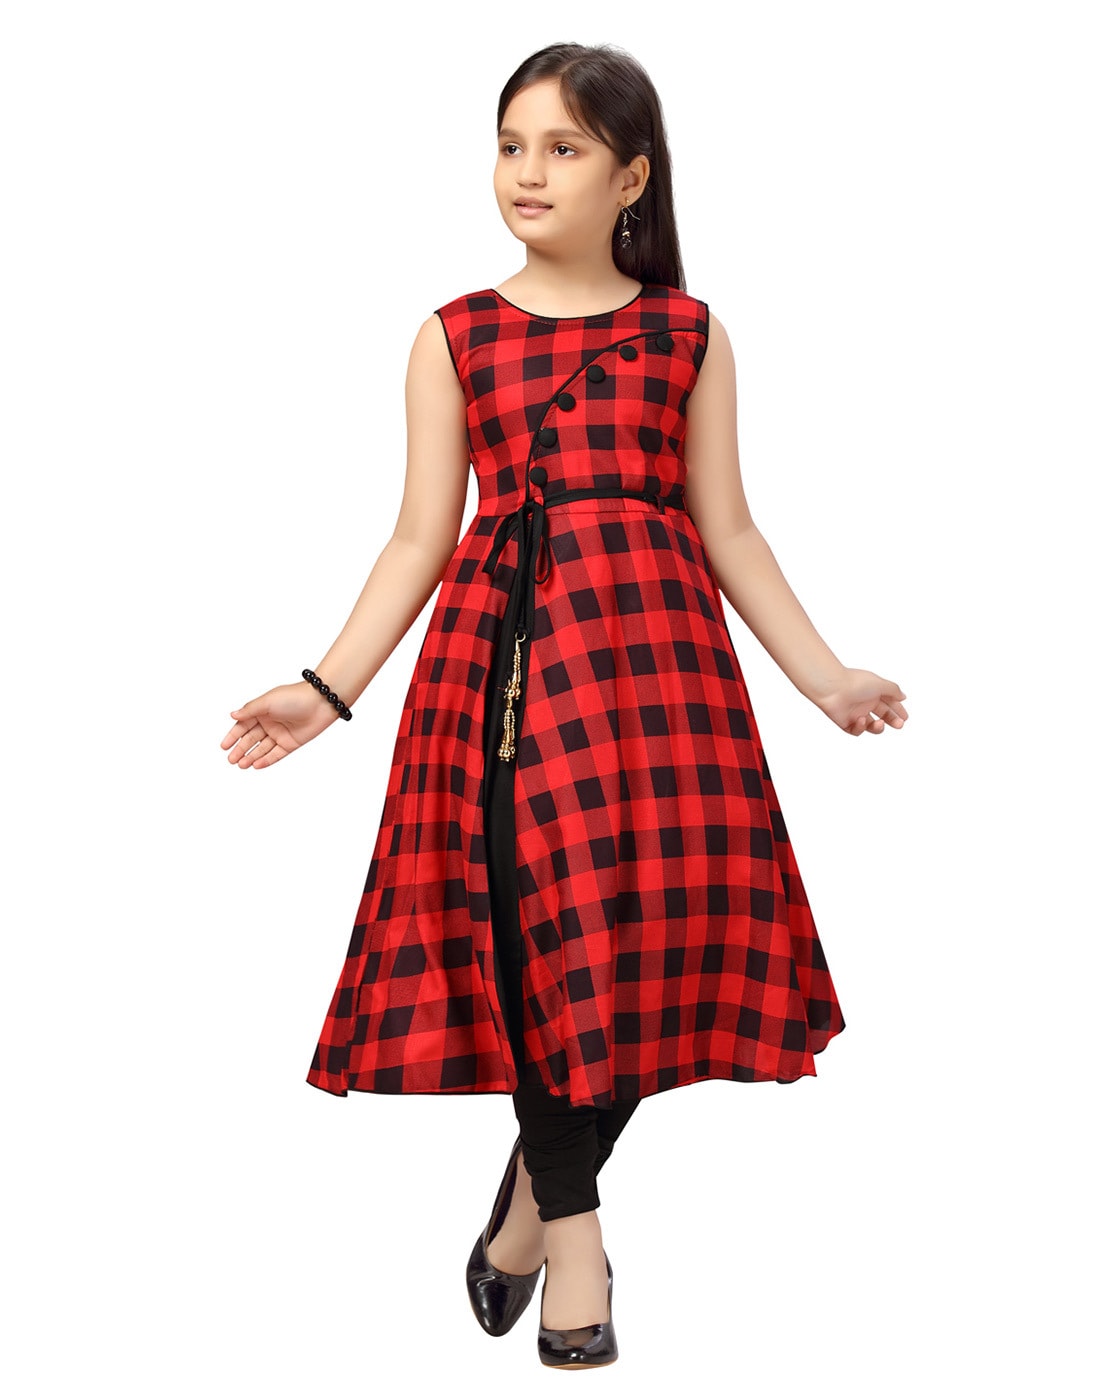 Wholesale 2020 Children Summer Clothing Girls Dress Kids Overalls Baby Girl  Latest Frock Design Cotton Checker Fashional Beach Dresses From  malibabacom